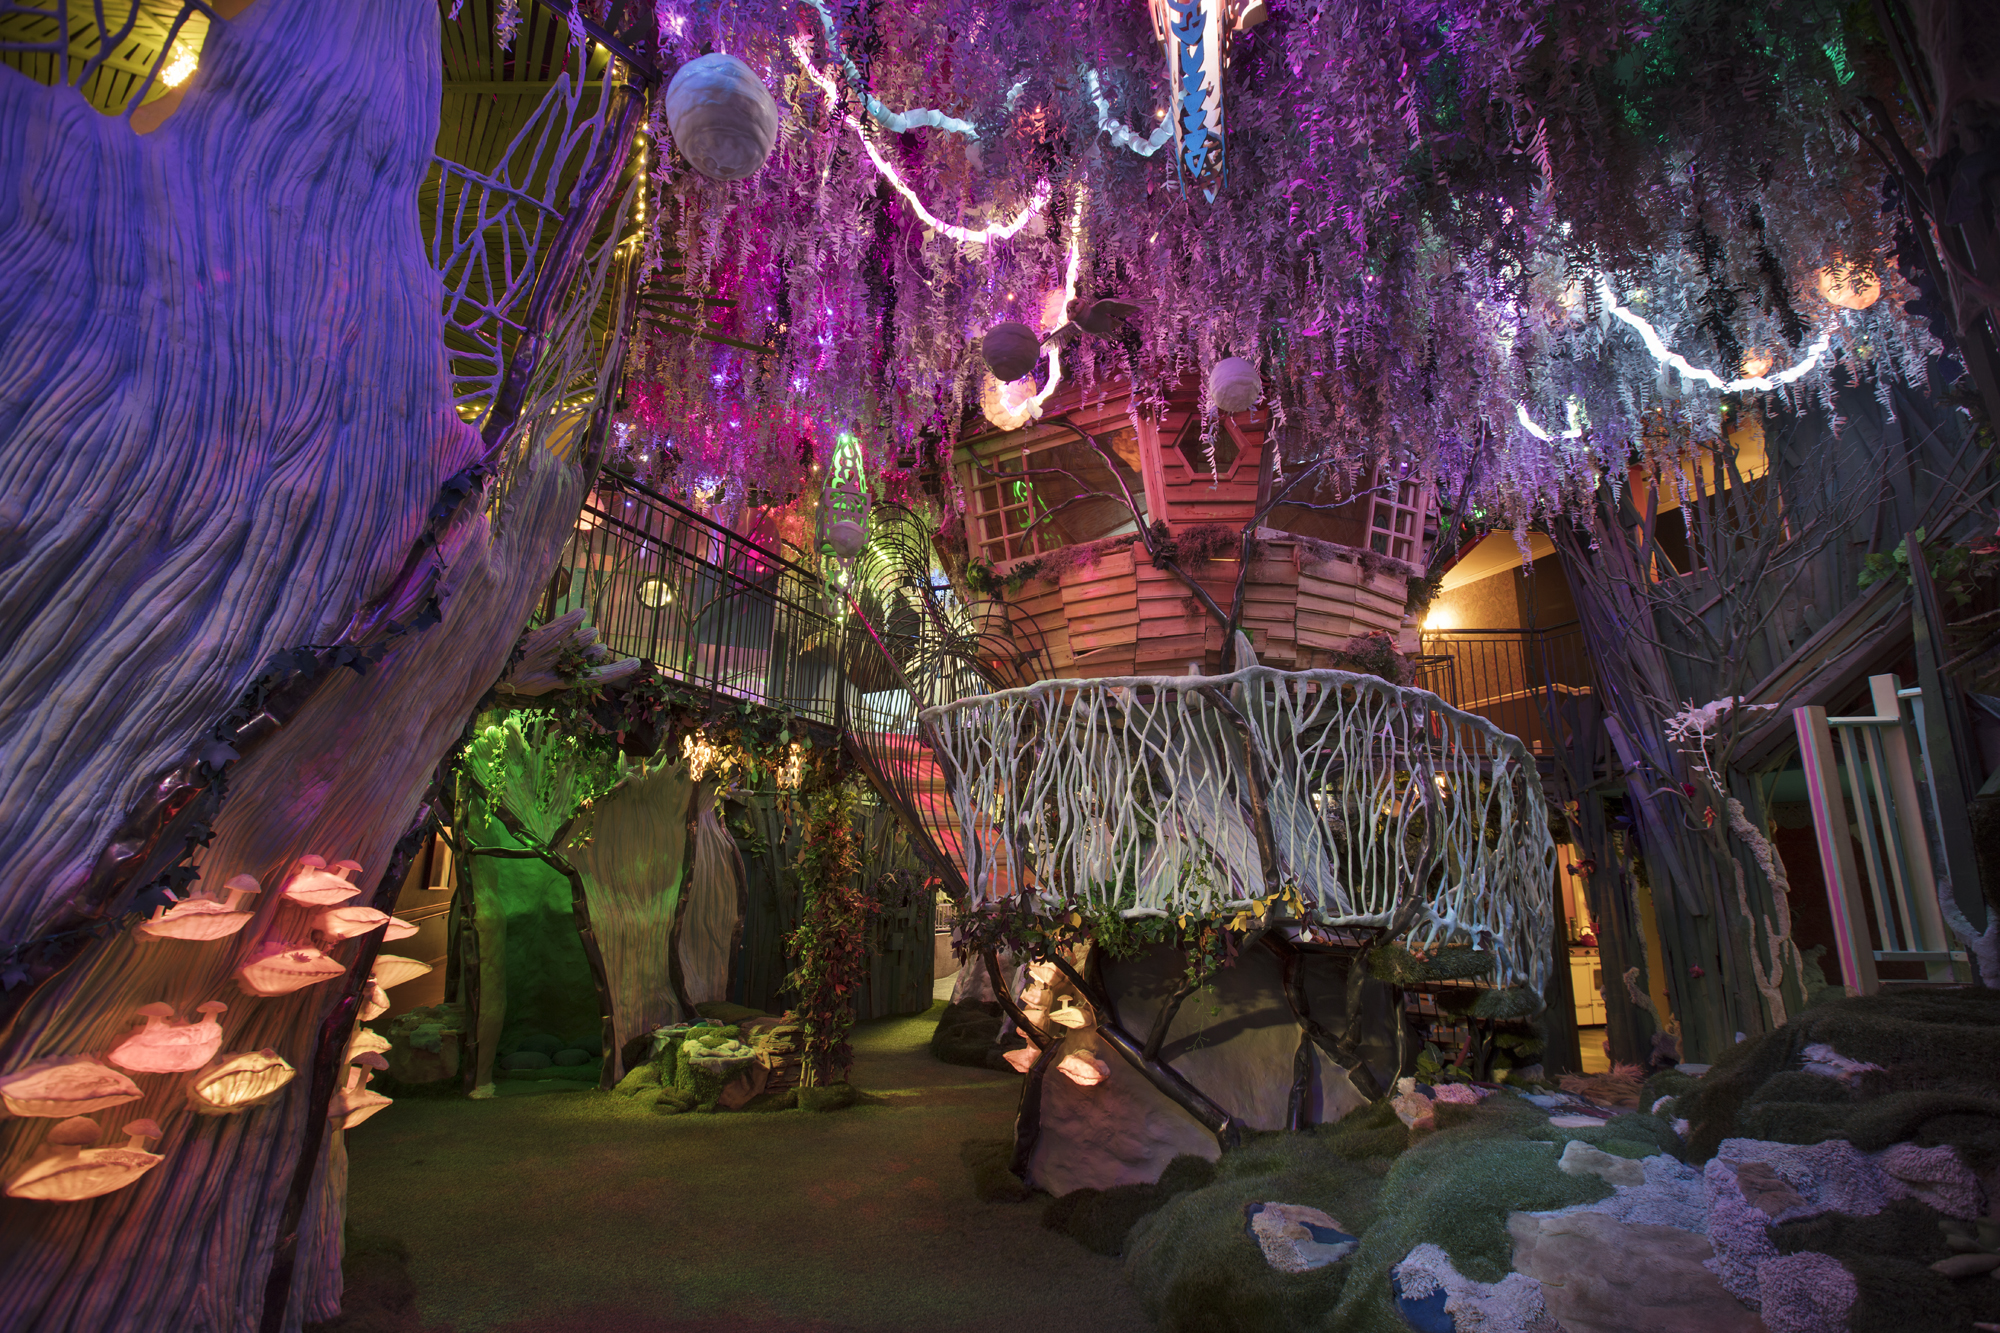 “The Forest, at House of Eternal Return in Santa Fe, NM. Photo by Kate Russell | Courtesy of Meow Wolf”